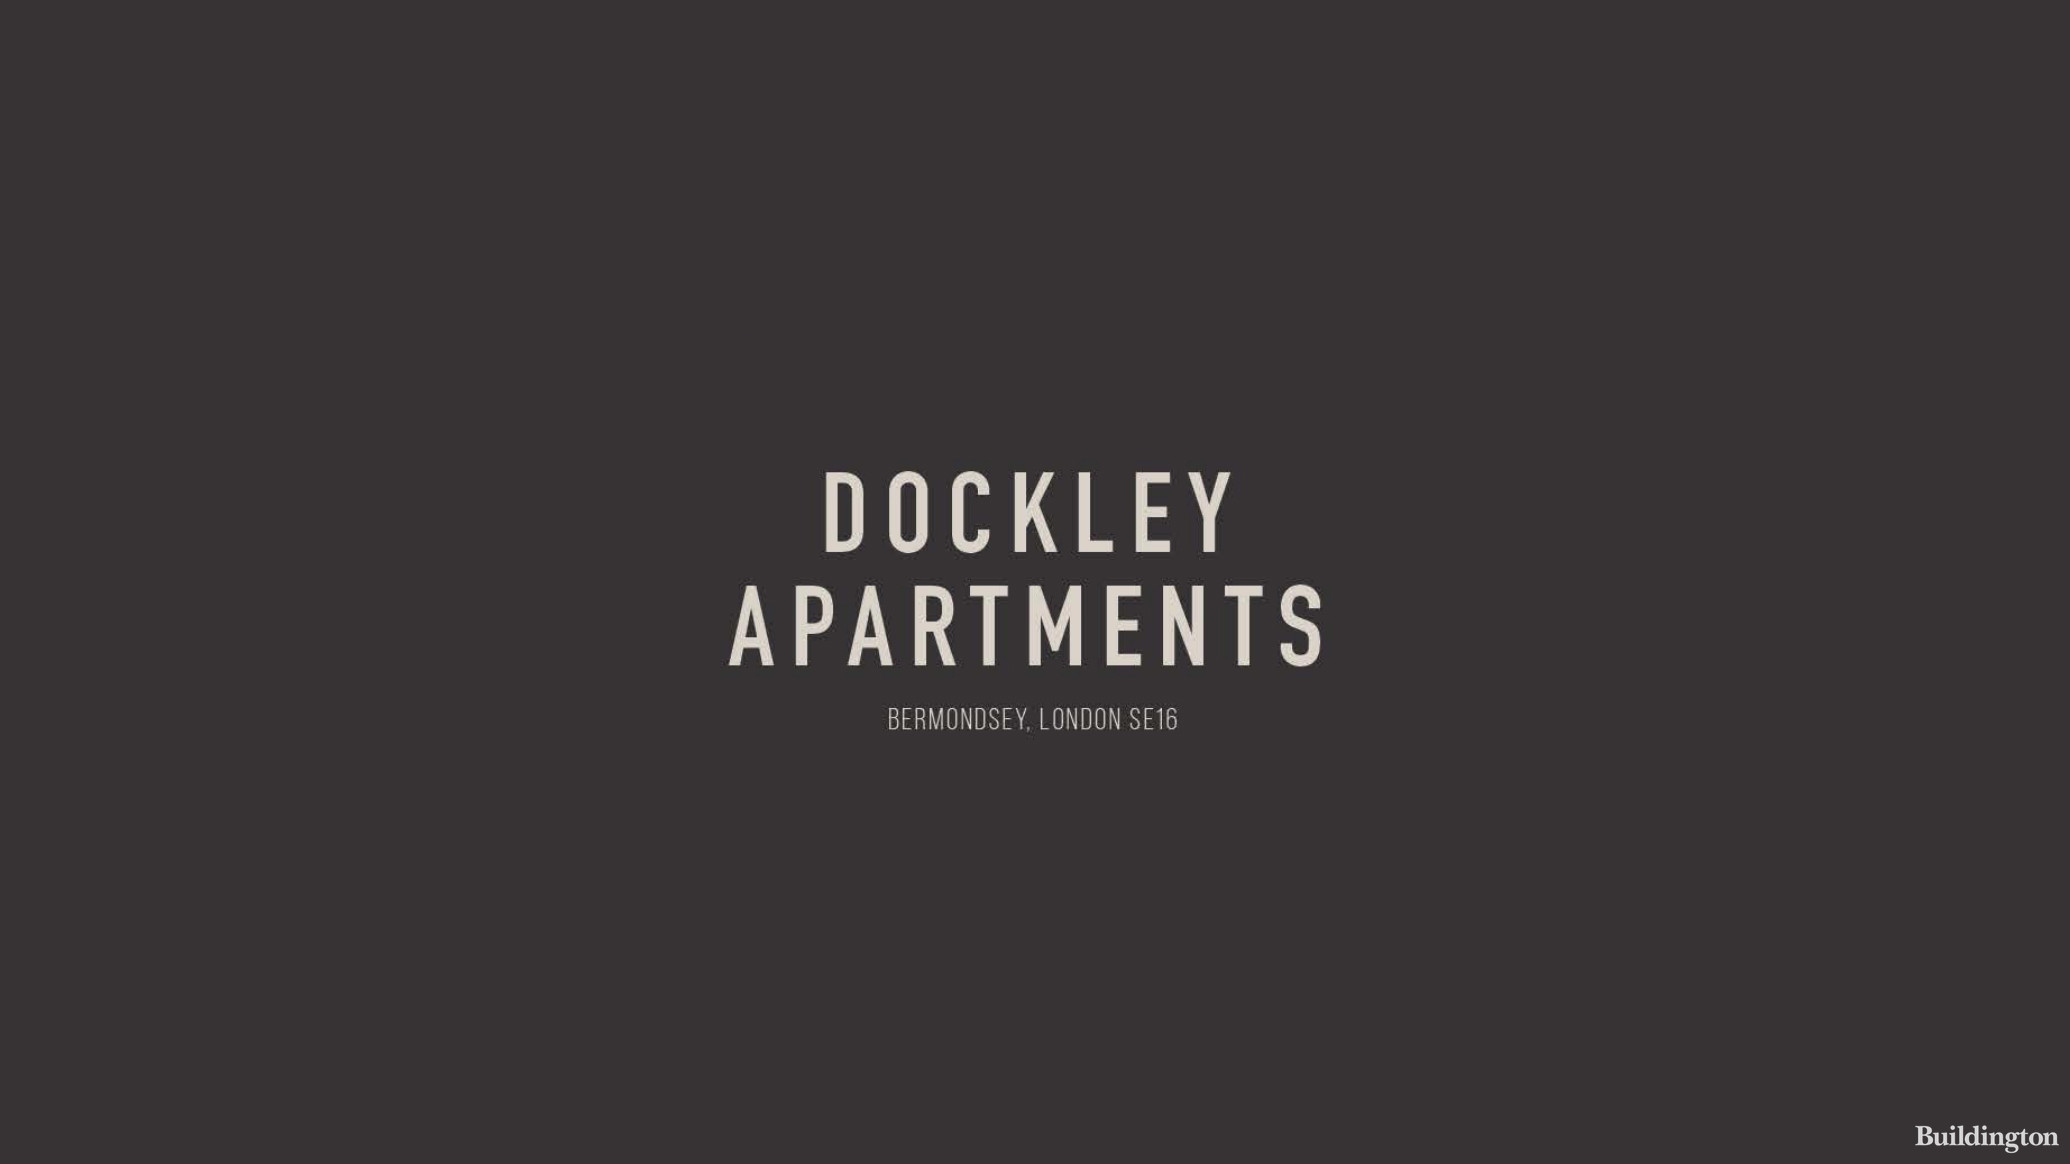 Dockley Apartments development by Matching Green.